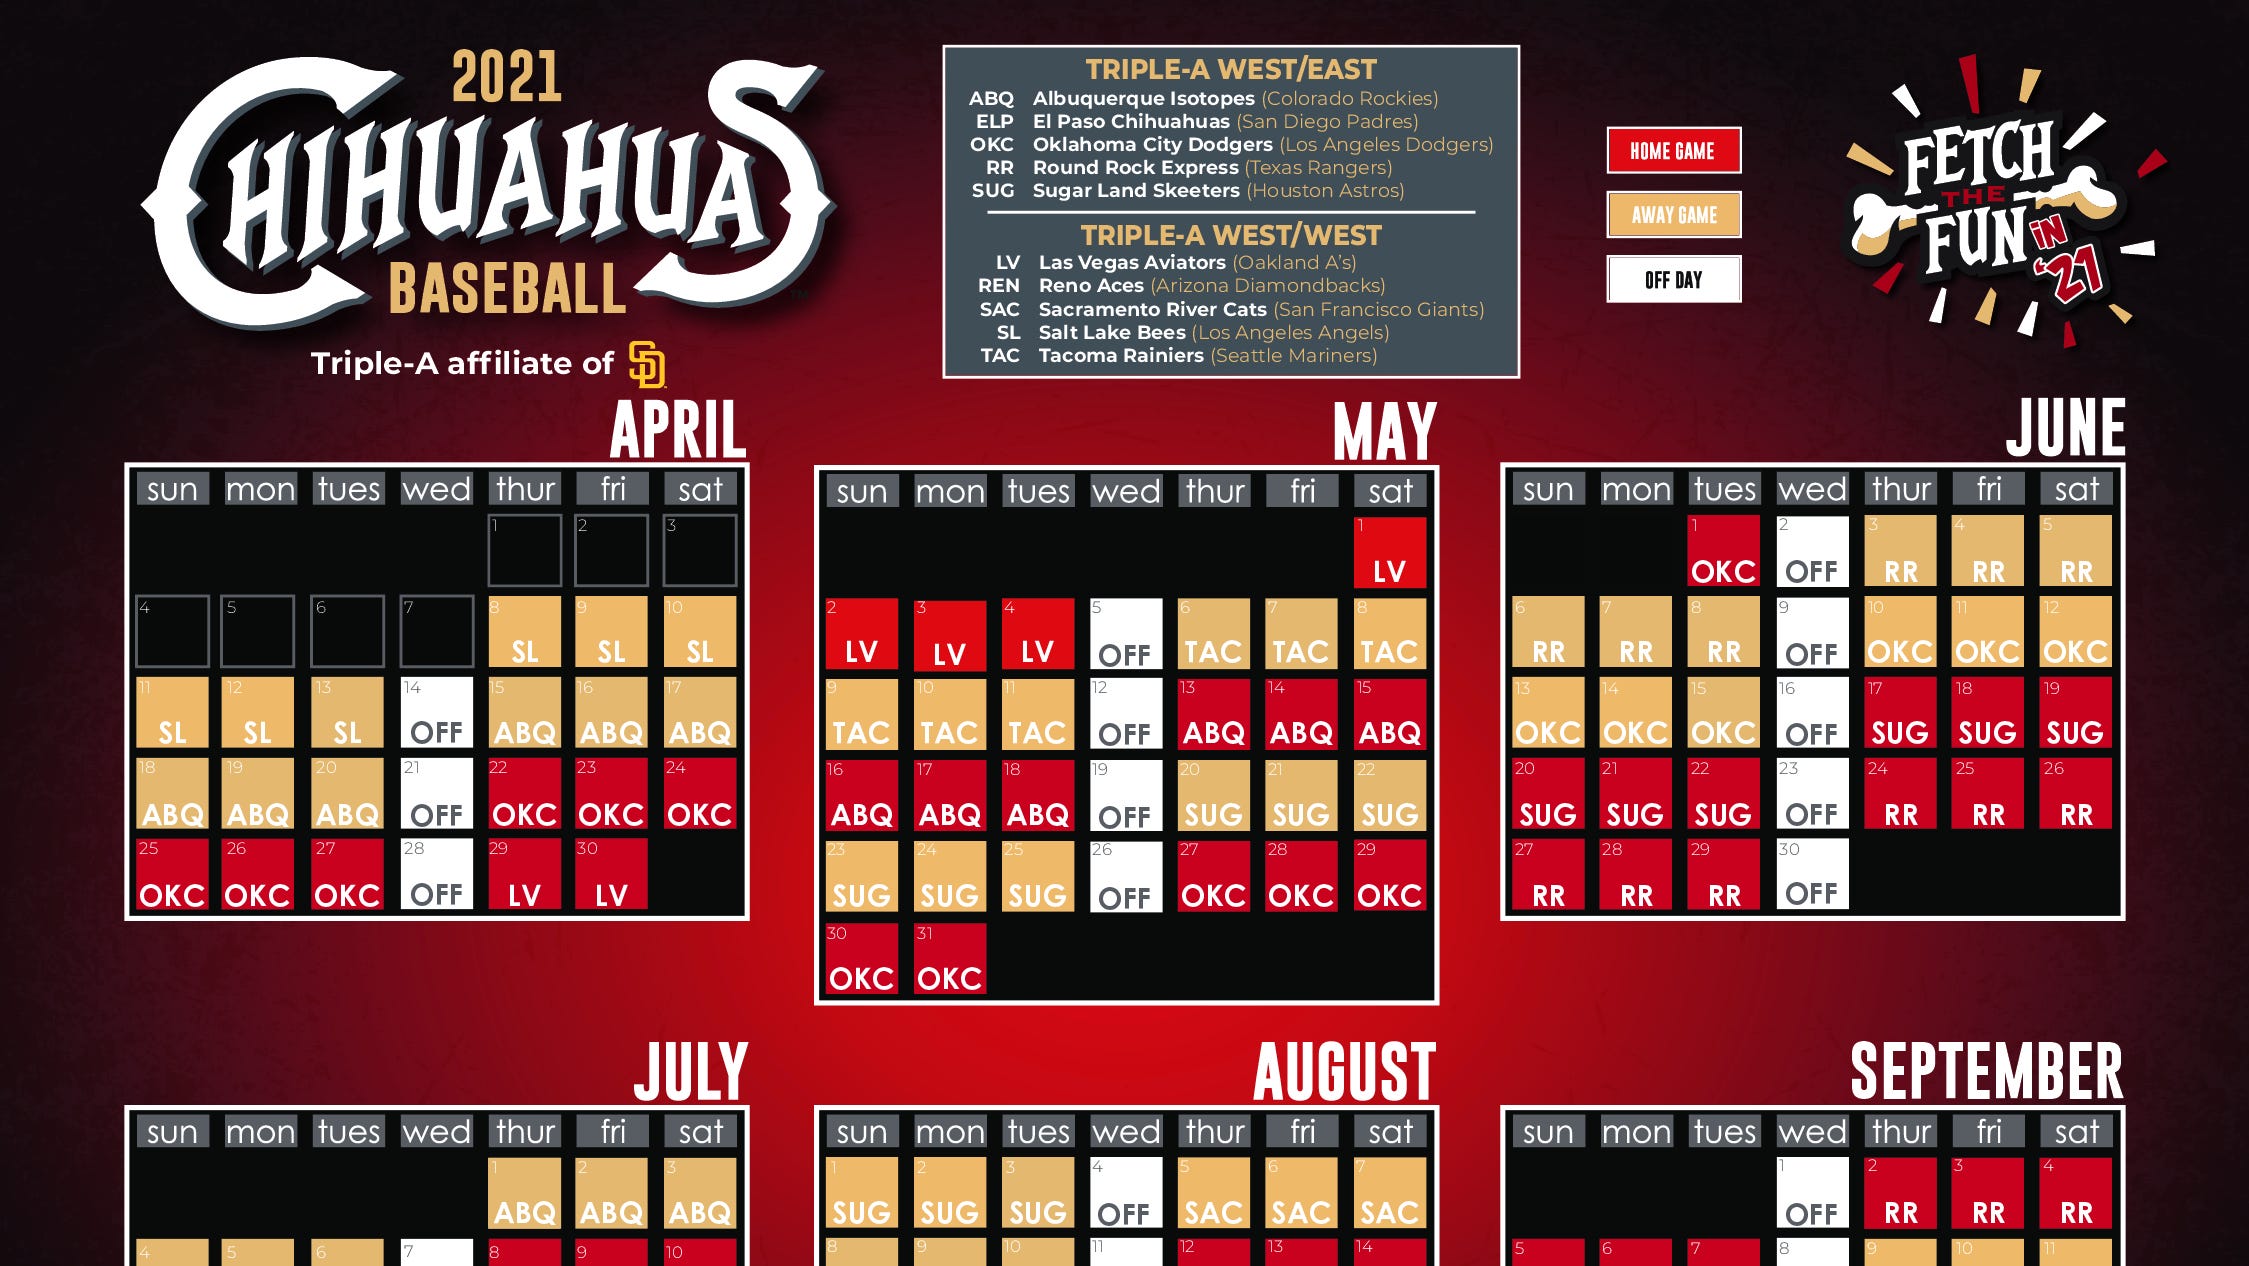 El Paso Chihuahuas schedule for 2021 season, first home game April 22